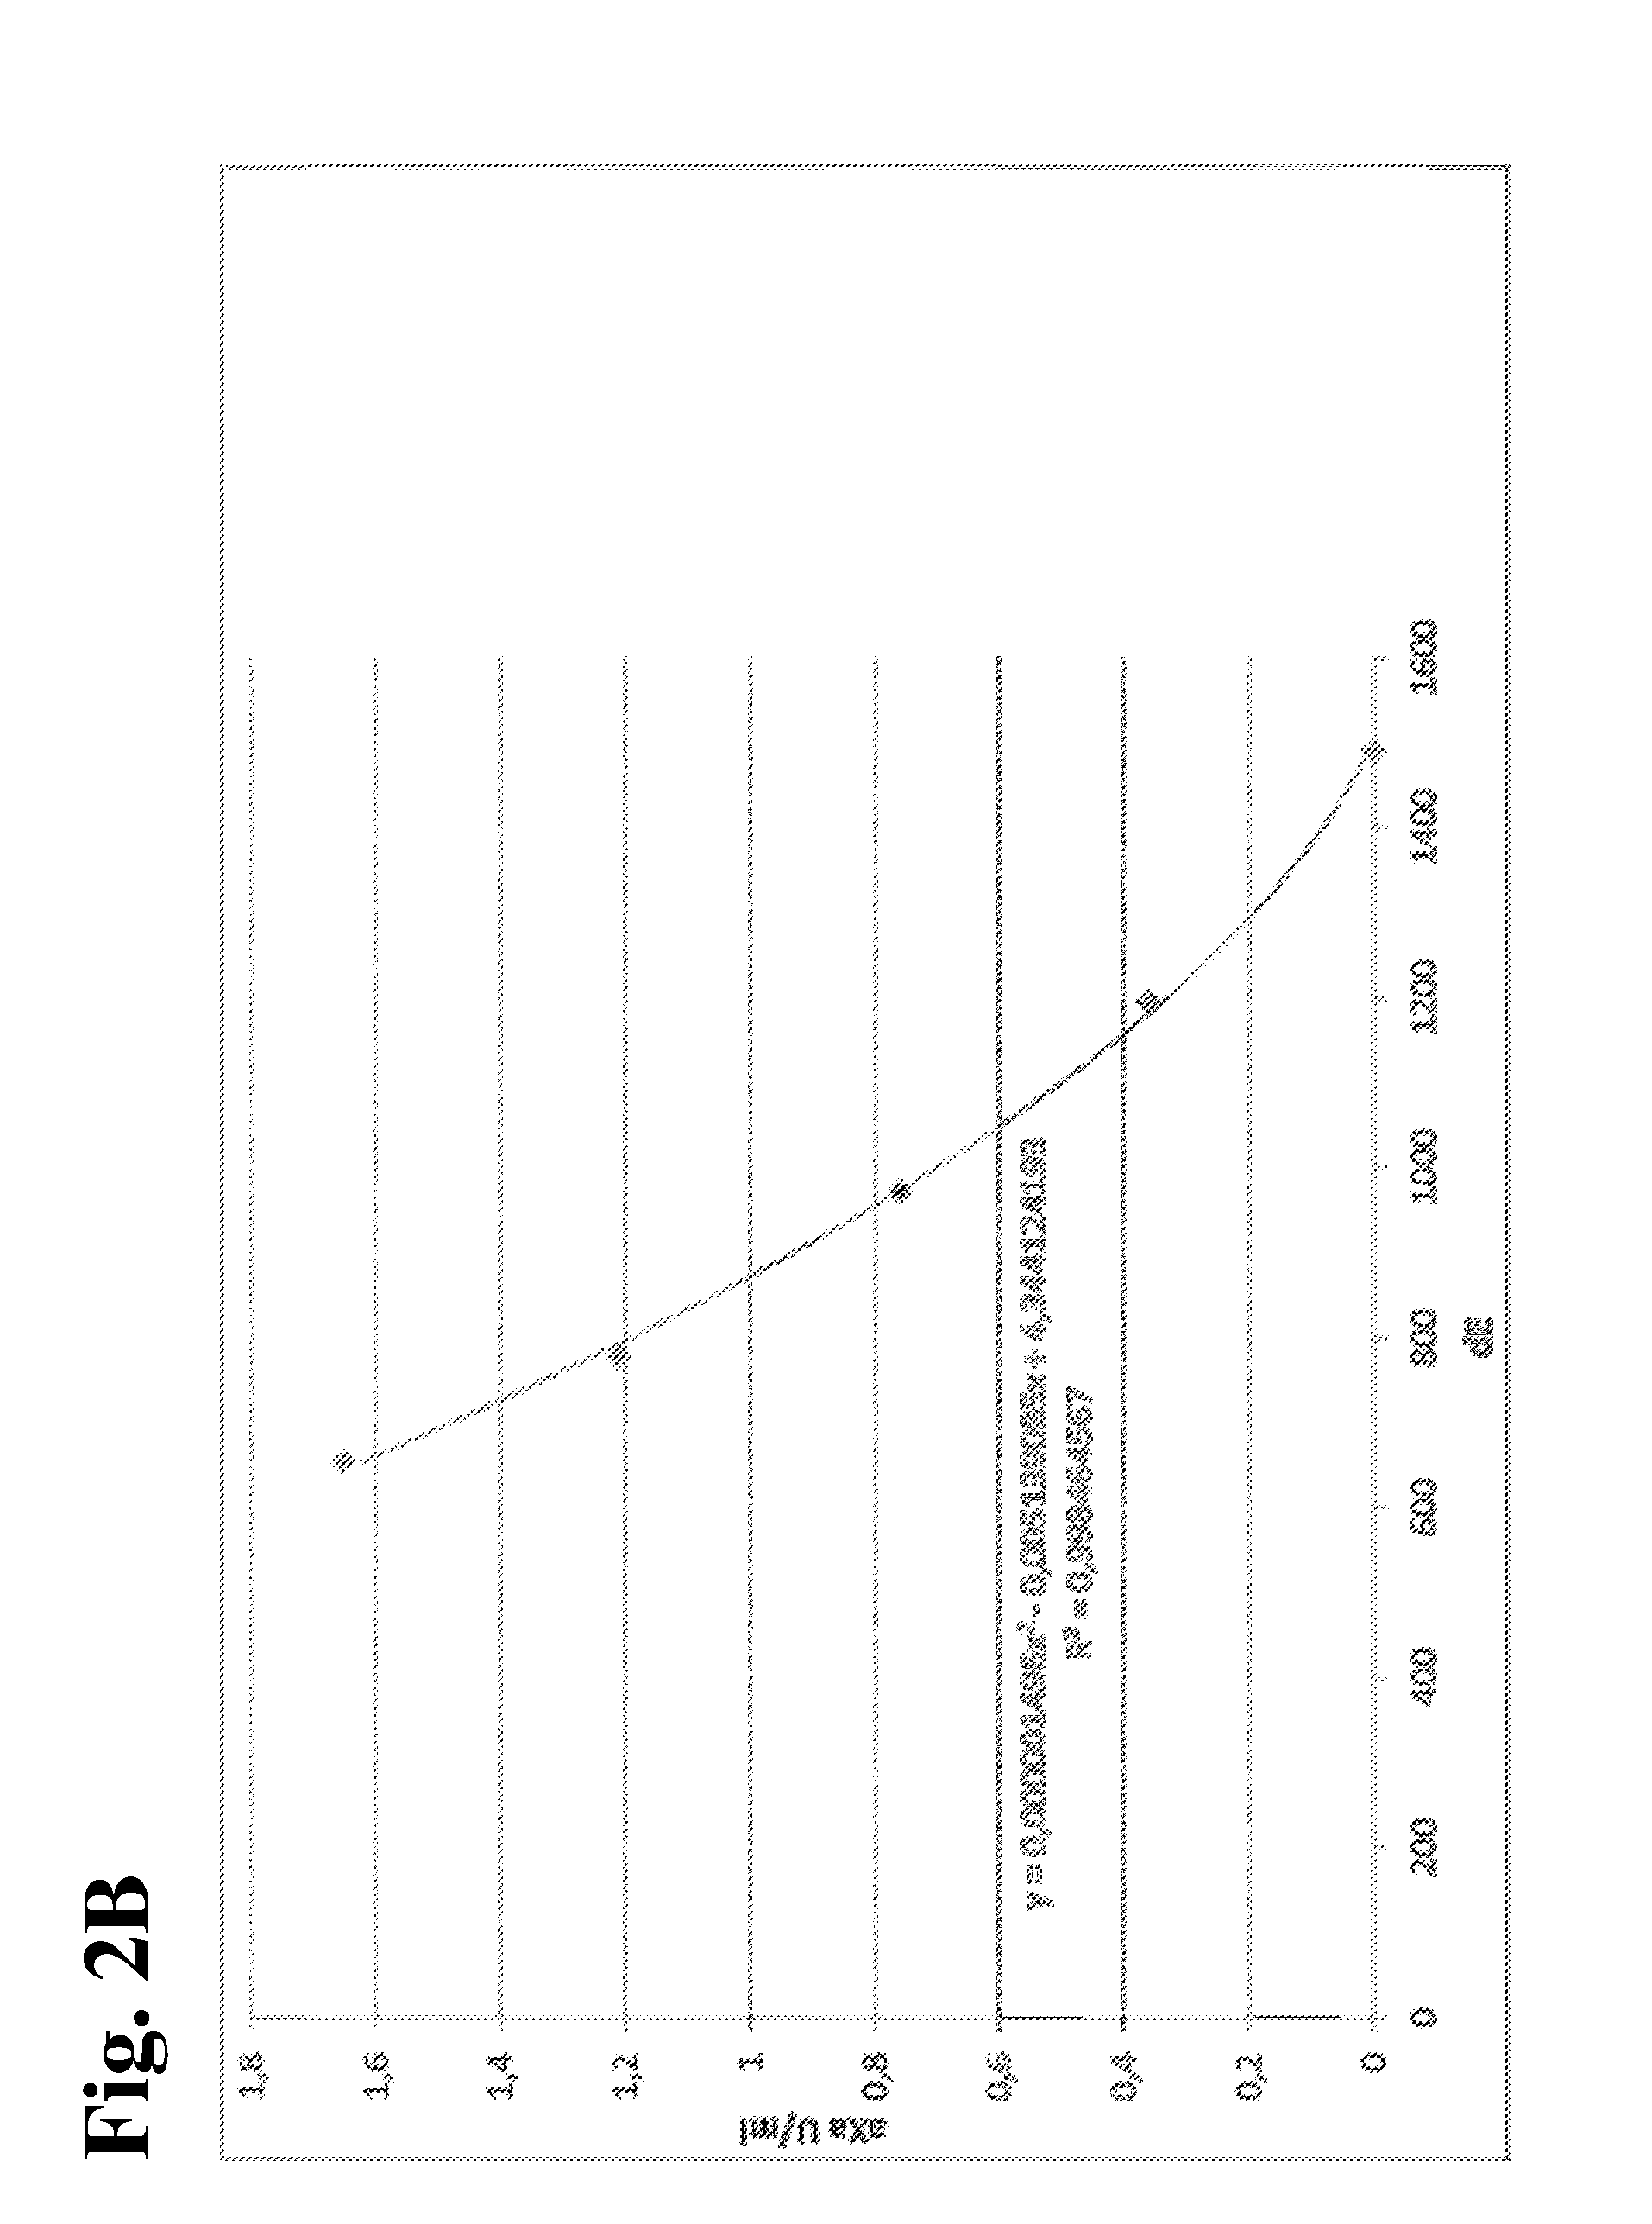 MEANS AND METHODS FOR UNIVERSAL CALIBRATION OF ANTI-FACTOR Xa TESTS